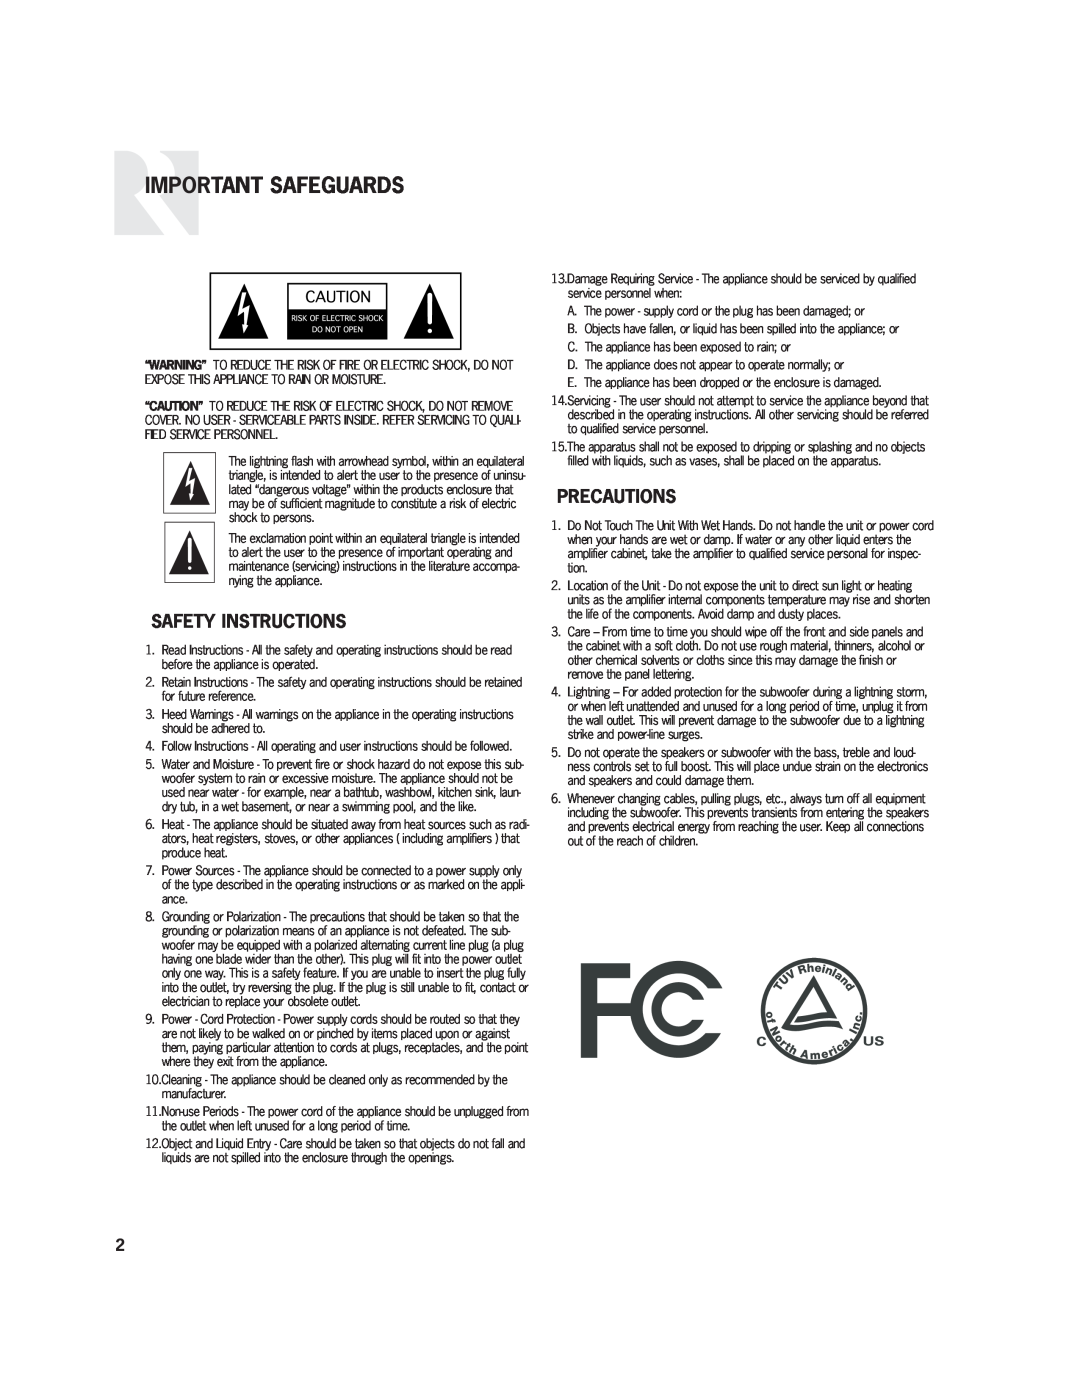 Russound R12DT user manual Important Safeguards, Safety Instructions, Precautions 